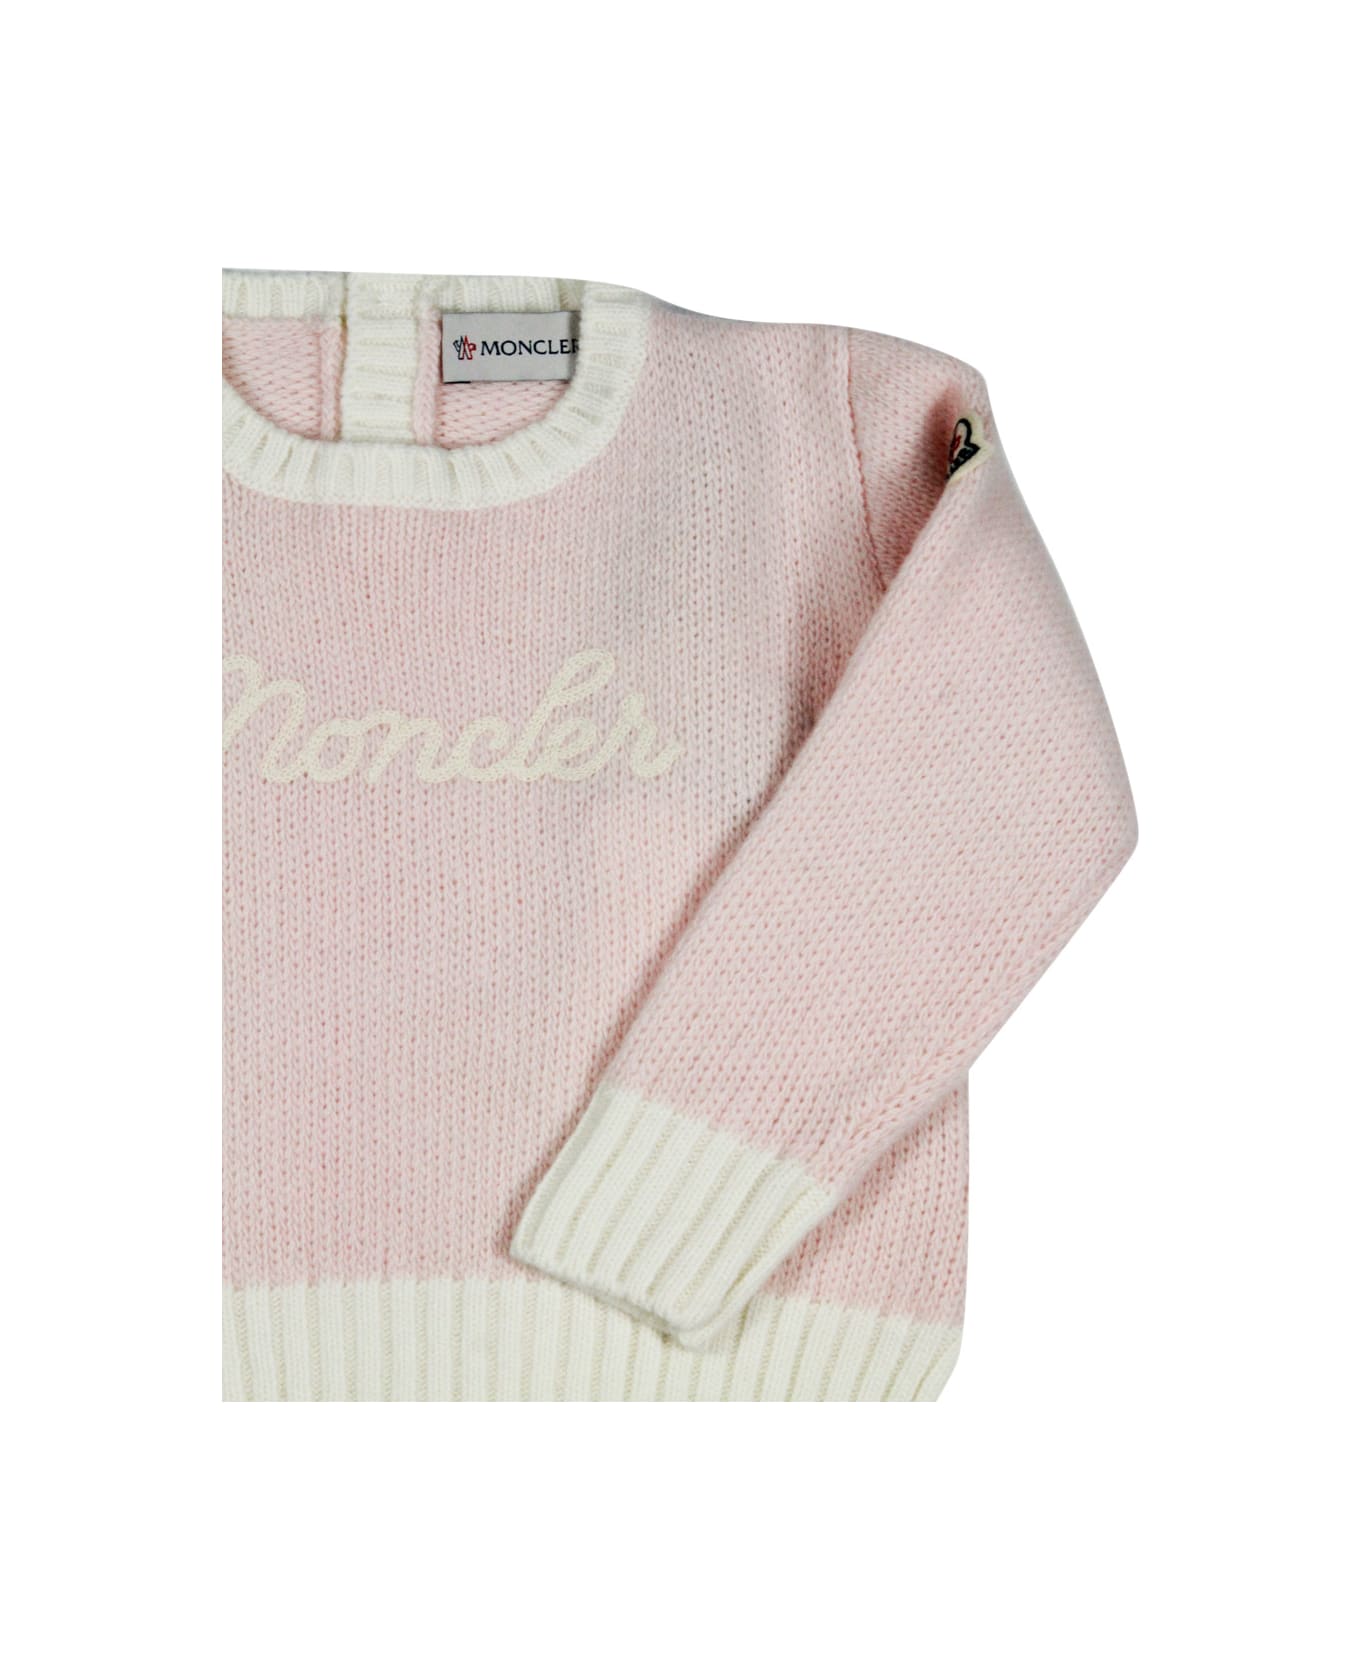 Moncler Crewneck And Long Sleeve Tricot Sweater In Soft Wool With Logo Lettering On The Chest. - Pink